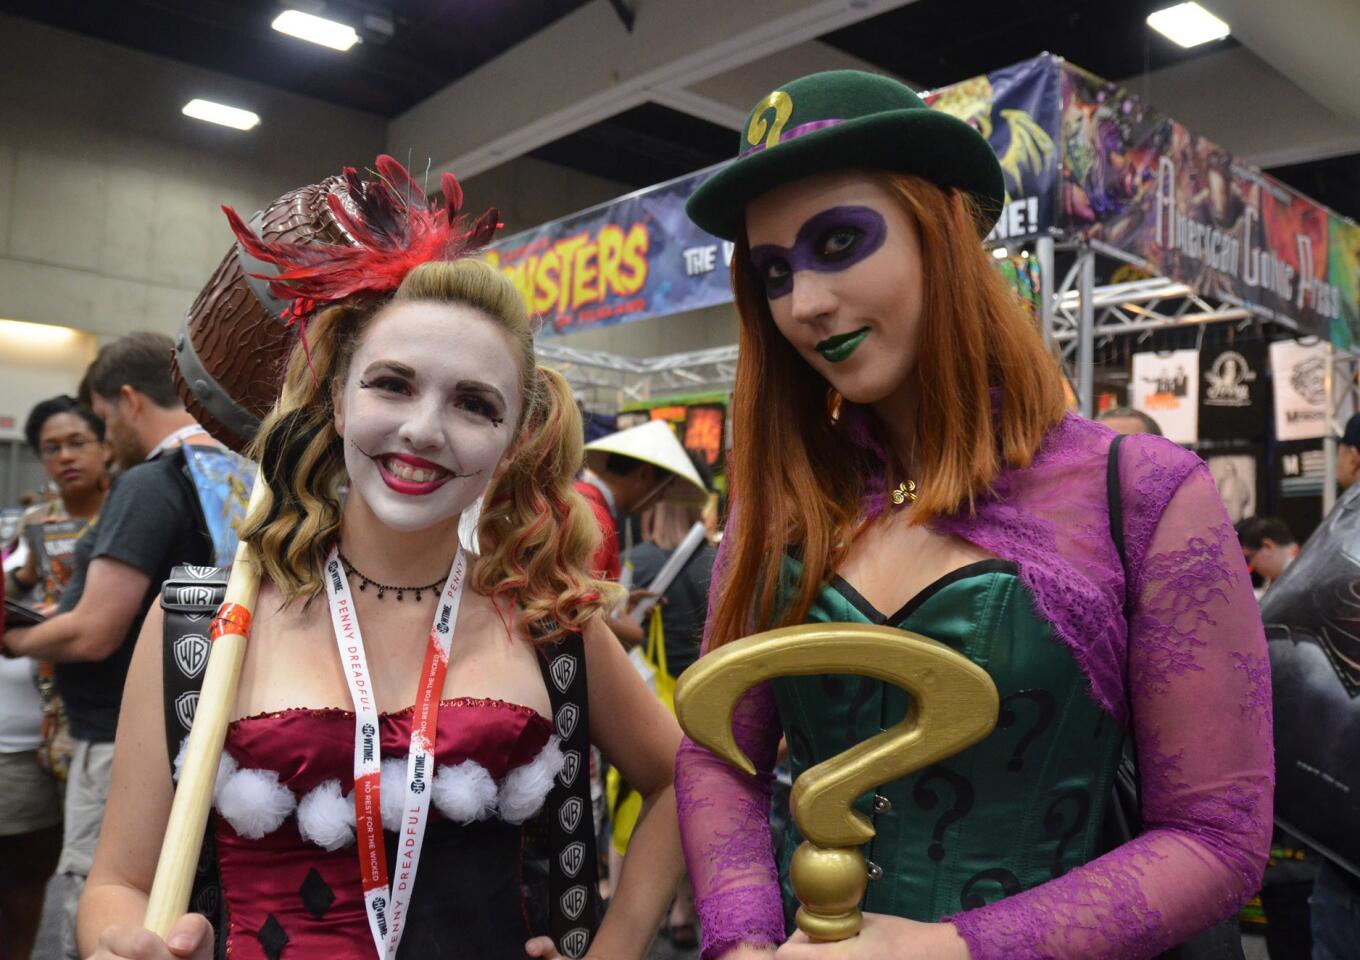 Chelsea Clinard, 26, and Katie Wirick, 25, both of Sacramento, said they haven't been harassed at conventions but have heard stories of women being harassed. "People have told us little comments, but it's nothing too extreme," Clinard said Thursday at San Diego Comic-Con. "Most of the time it's just been in good fun. I've never been scared or uncomfortable."